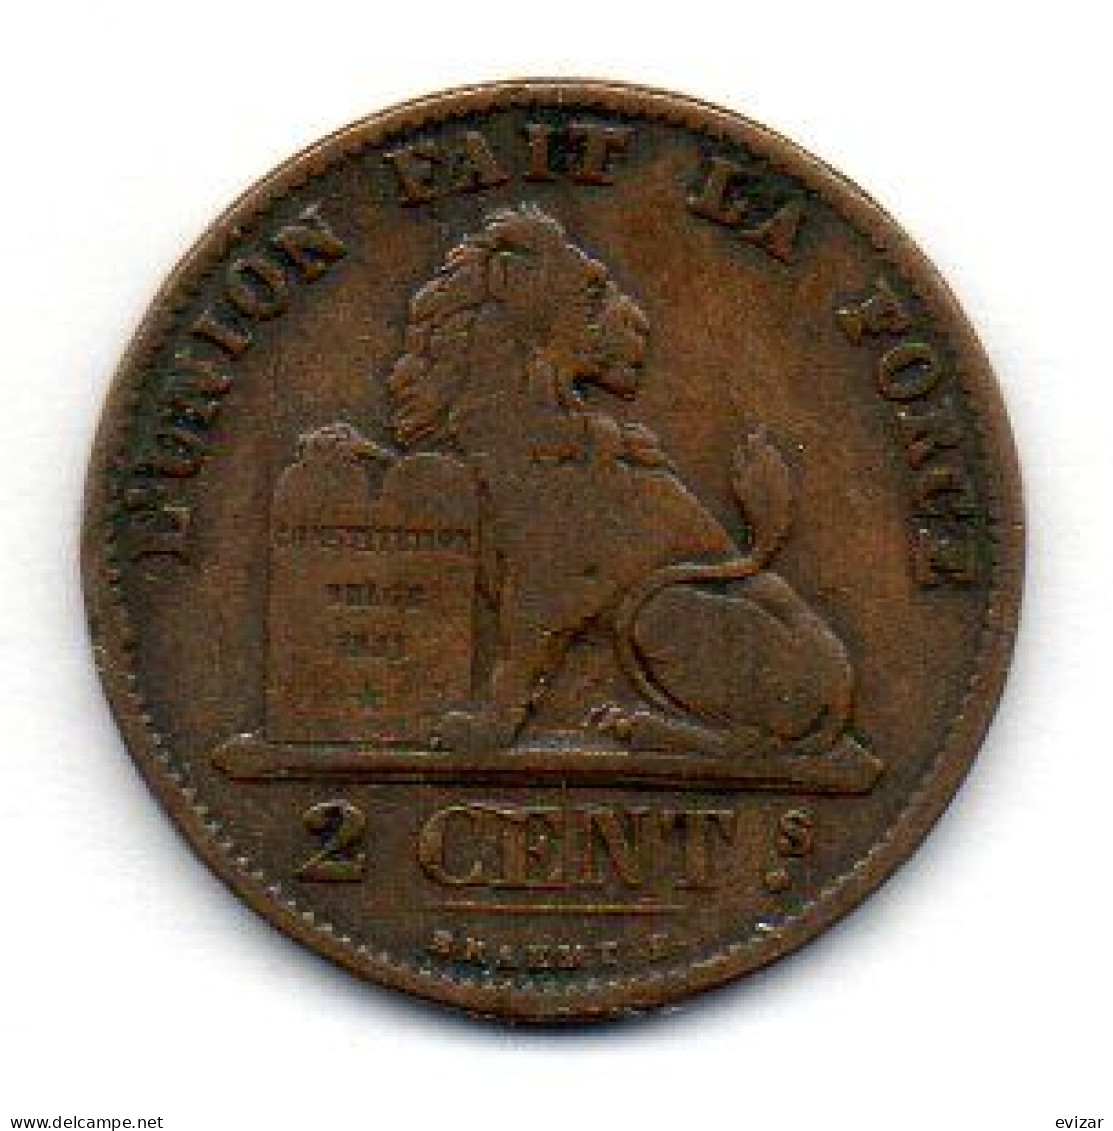 BELGIUM, 2 Centimes, Copper, Year 1876, KM # 35.1, French Legend - 2 Cents